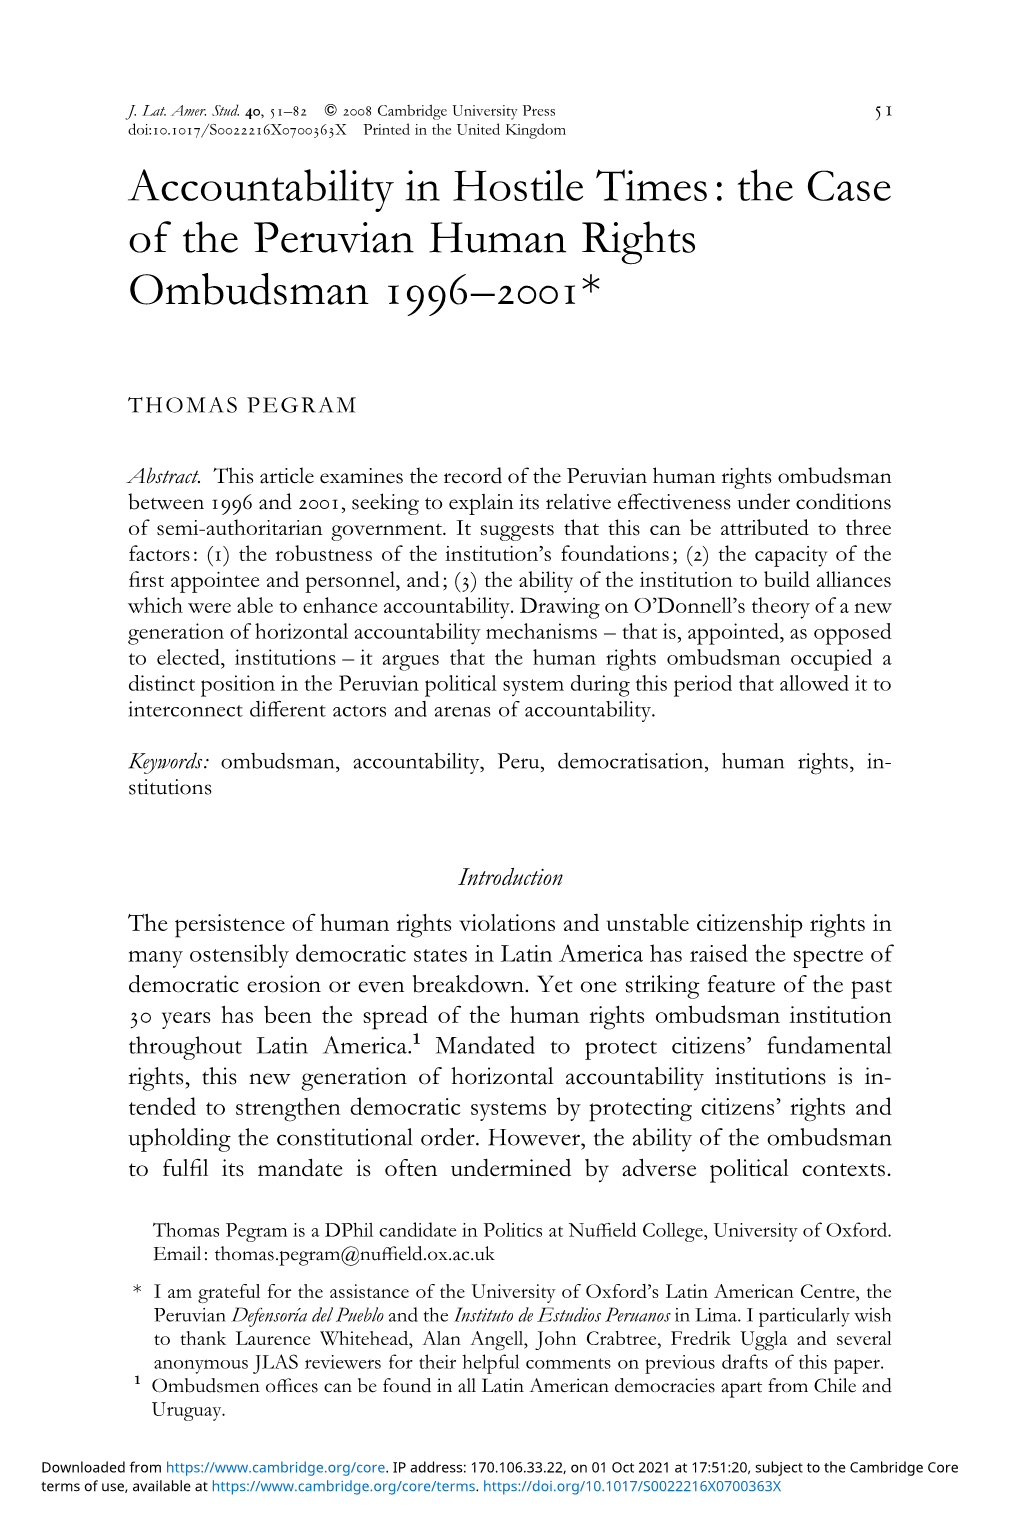 The Case of the Peruvian Human Rights Ombudsman 1996–2001*